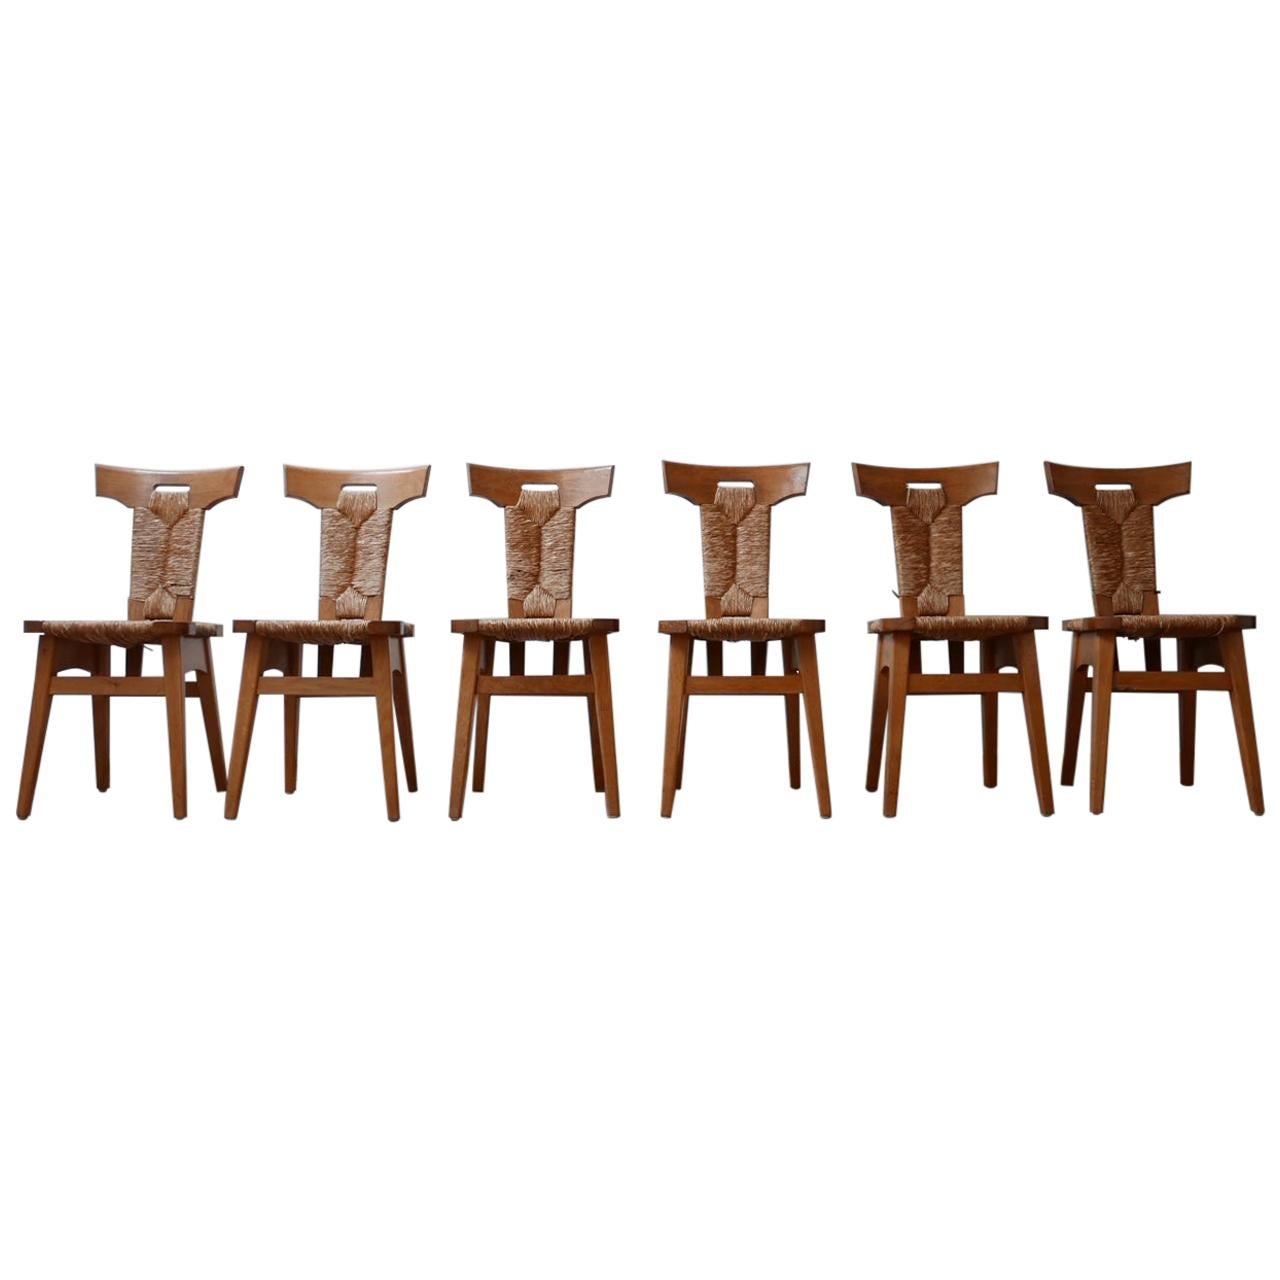 Set of Dutch Arts & Crafts Dining Chairs by W Kuyper